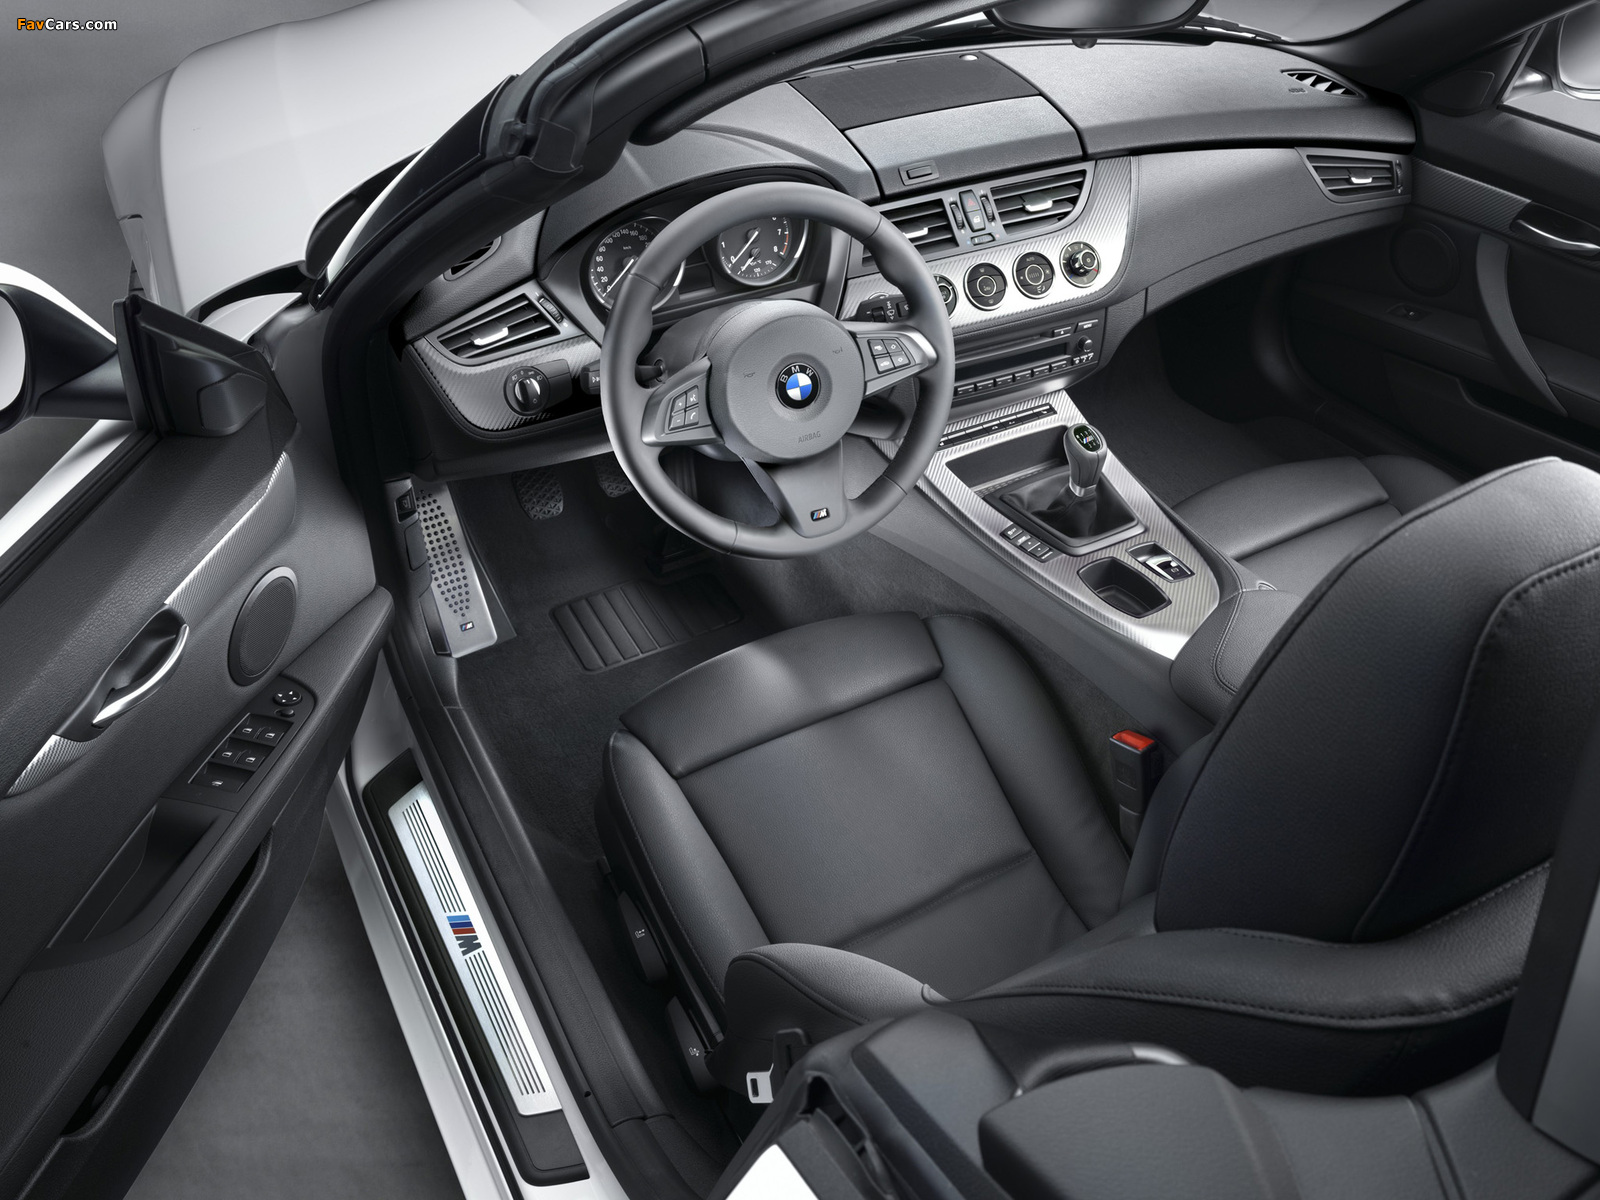 BMW Z4 sDrive30i Roadster M Sports Package (E89) 2009 wallpapers (1600 x 1200)